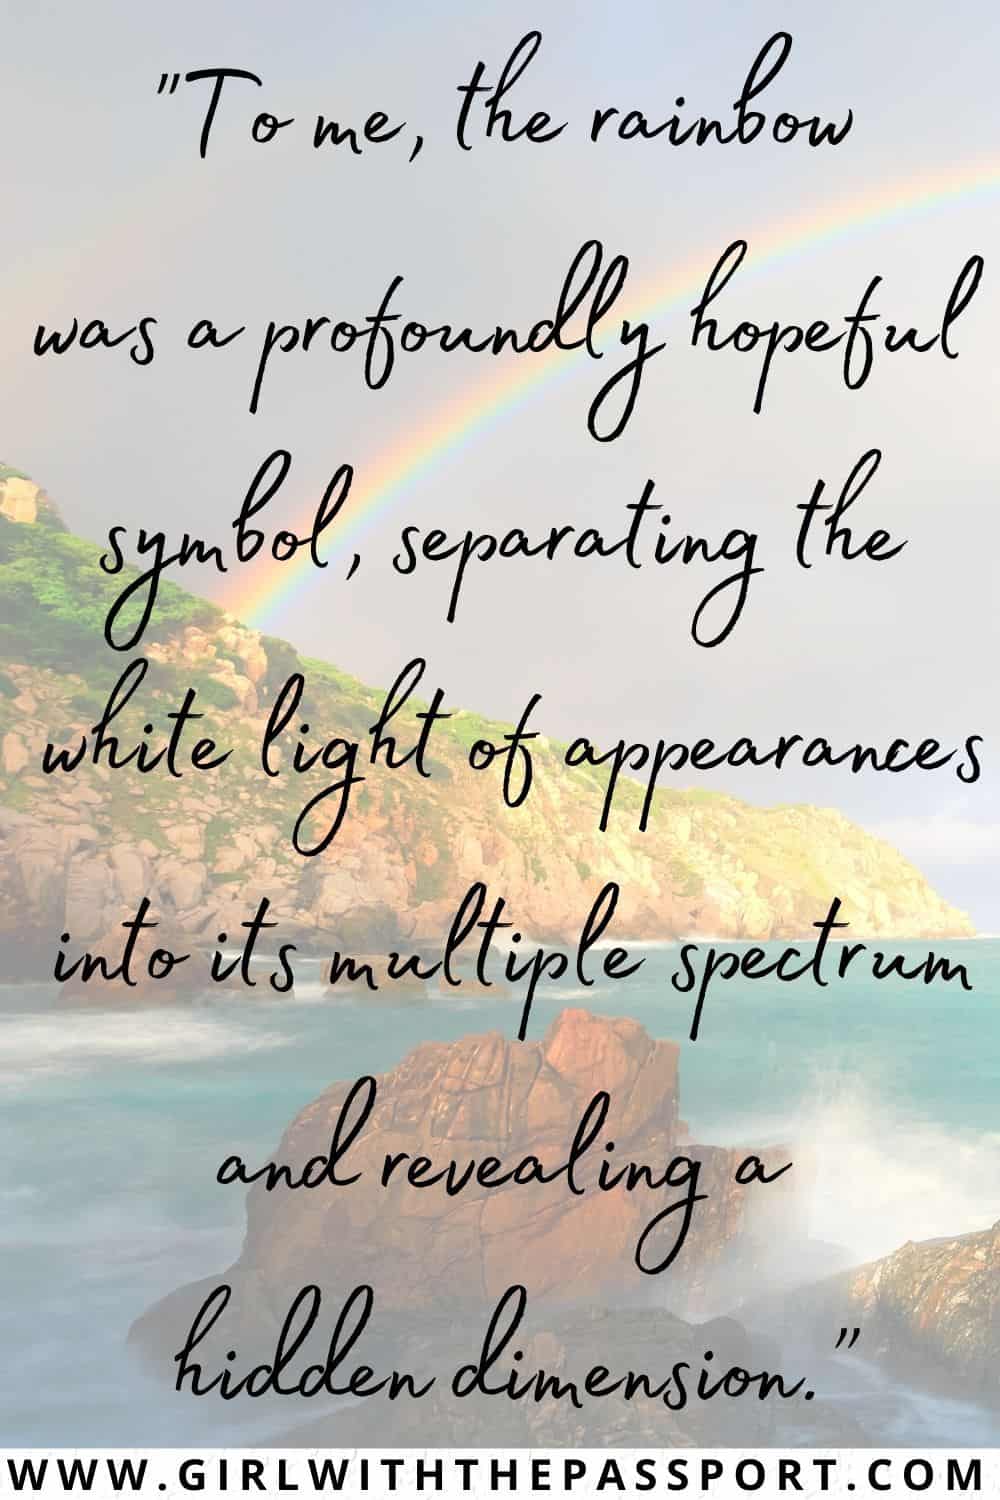 200+ Magnificent Rainbow Quotes and Quotes about Rainbows